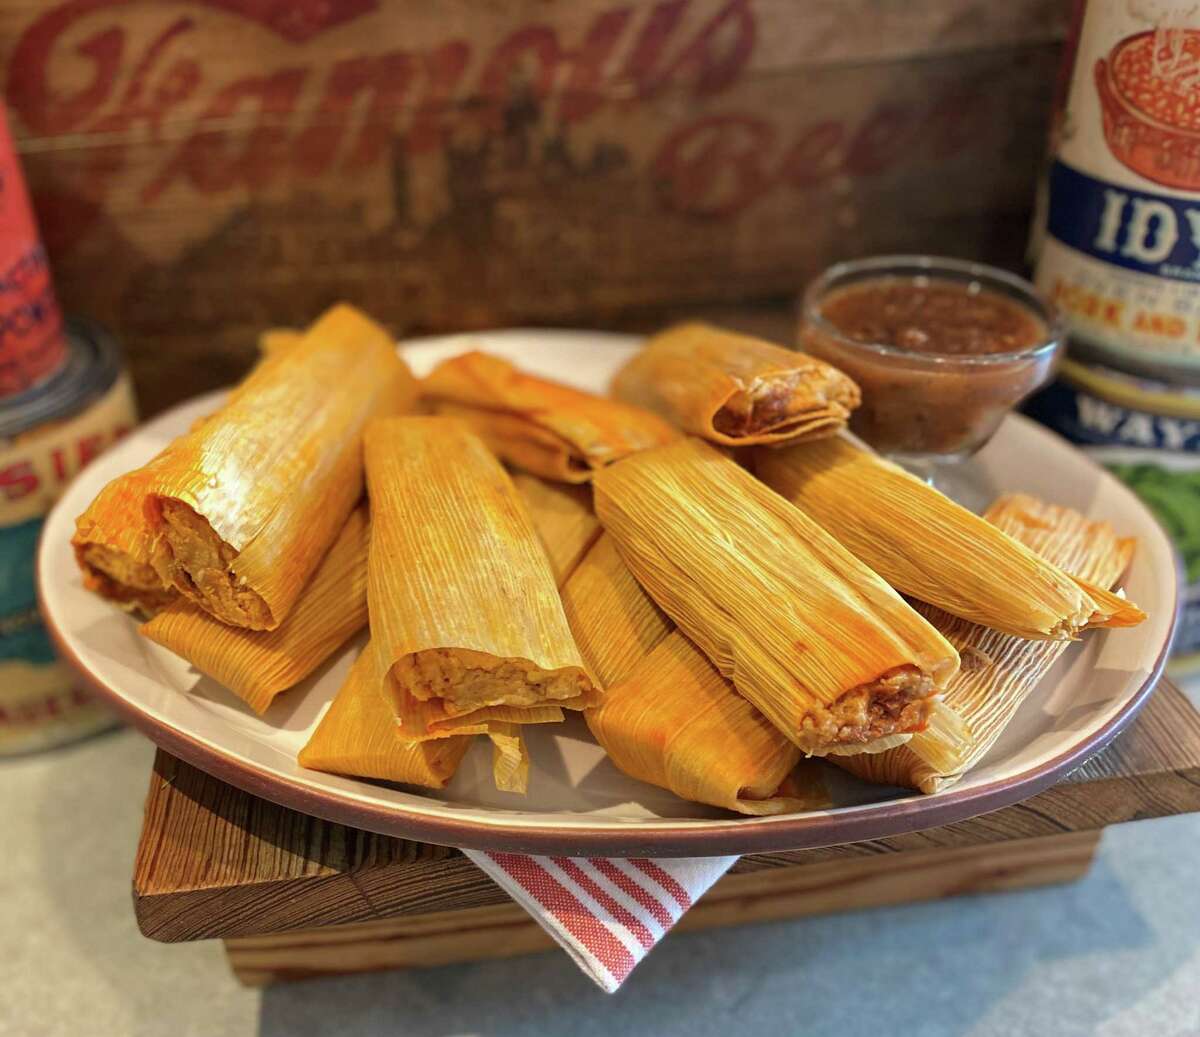 This file photo shows a plate of tamales.